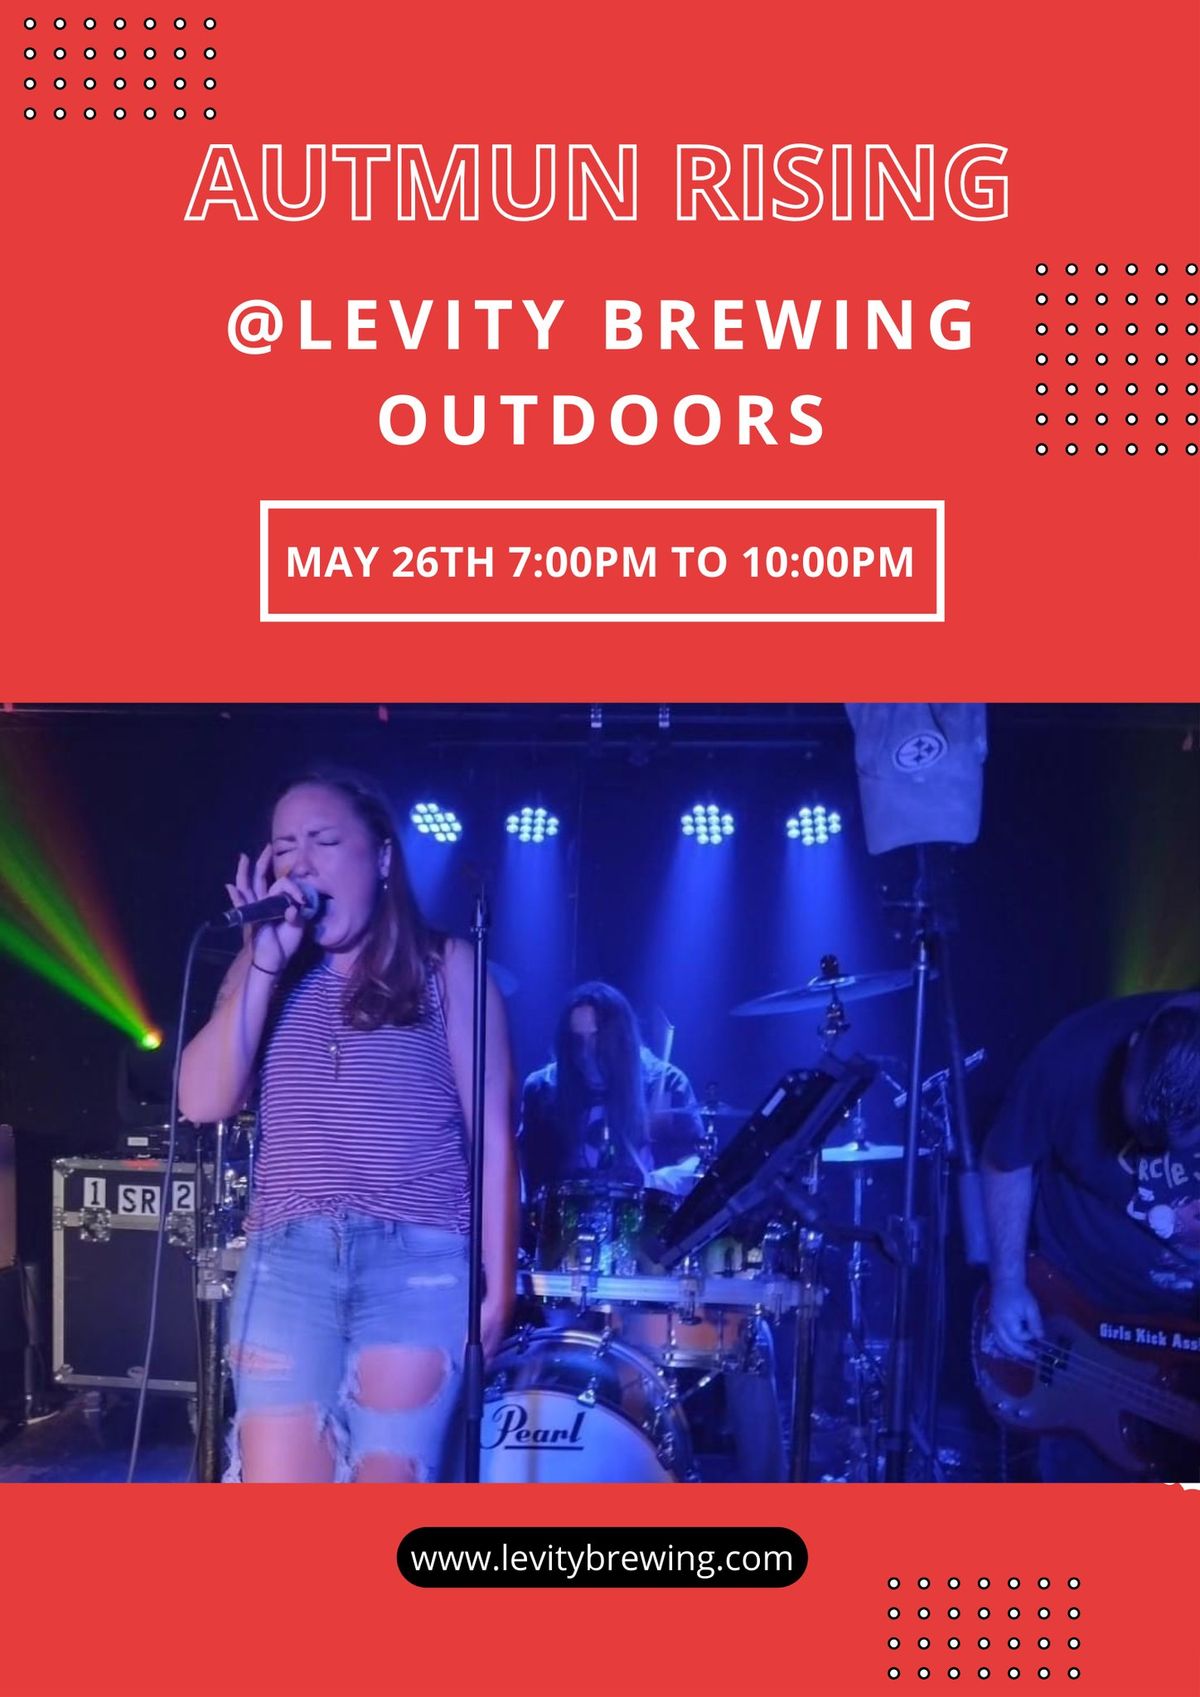 Autumn Rising At Levity Brewing Downtown Altoona